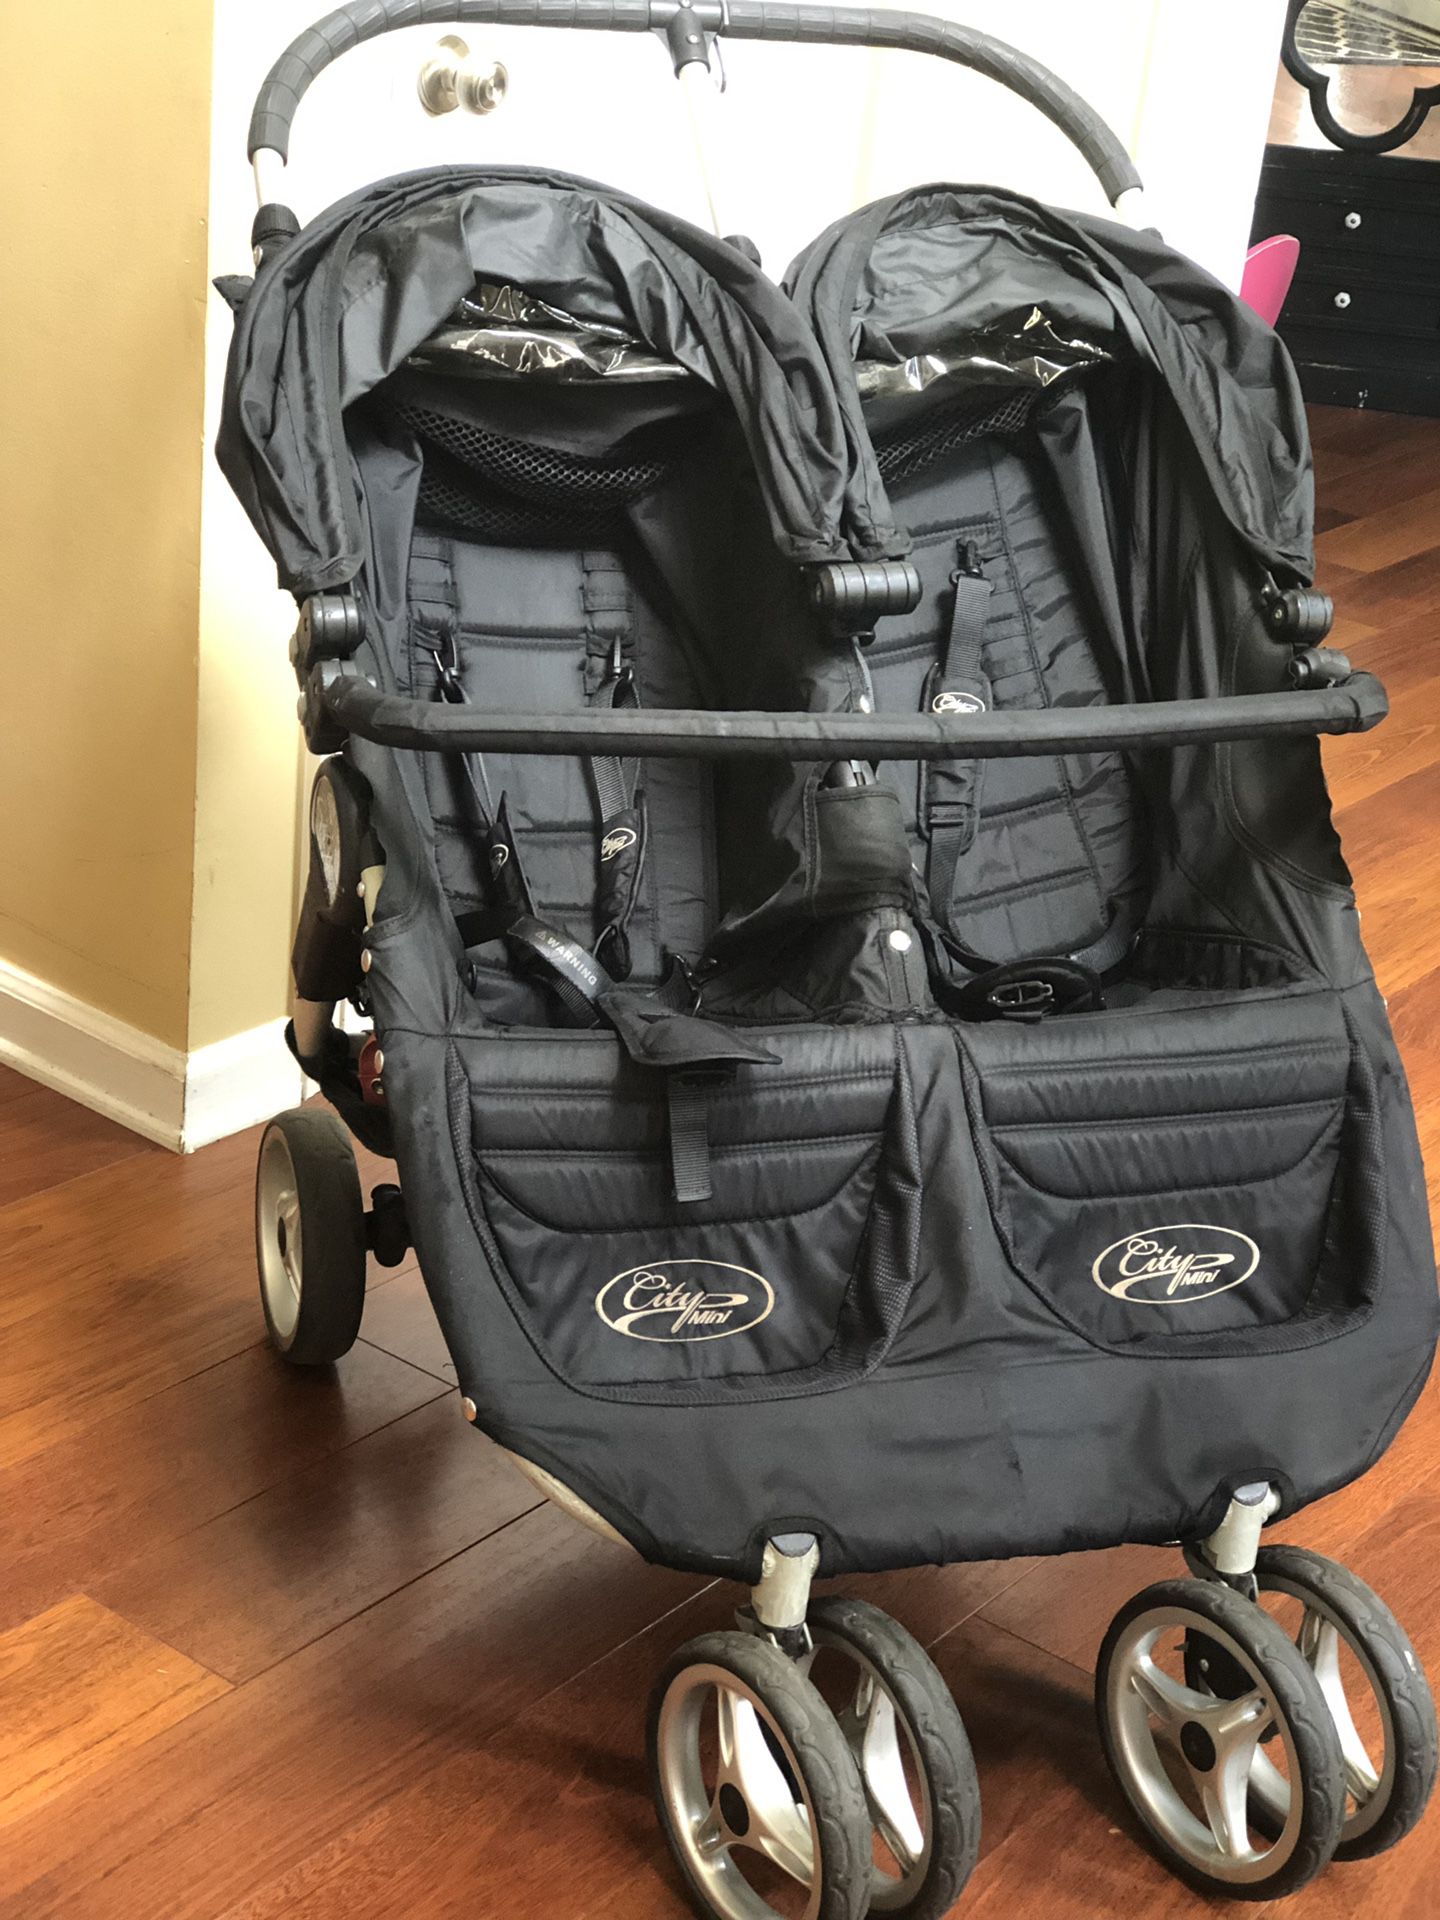 Citi mini baby jogger side by side double stroller